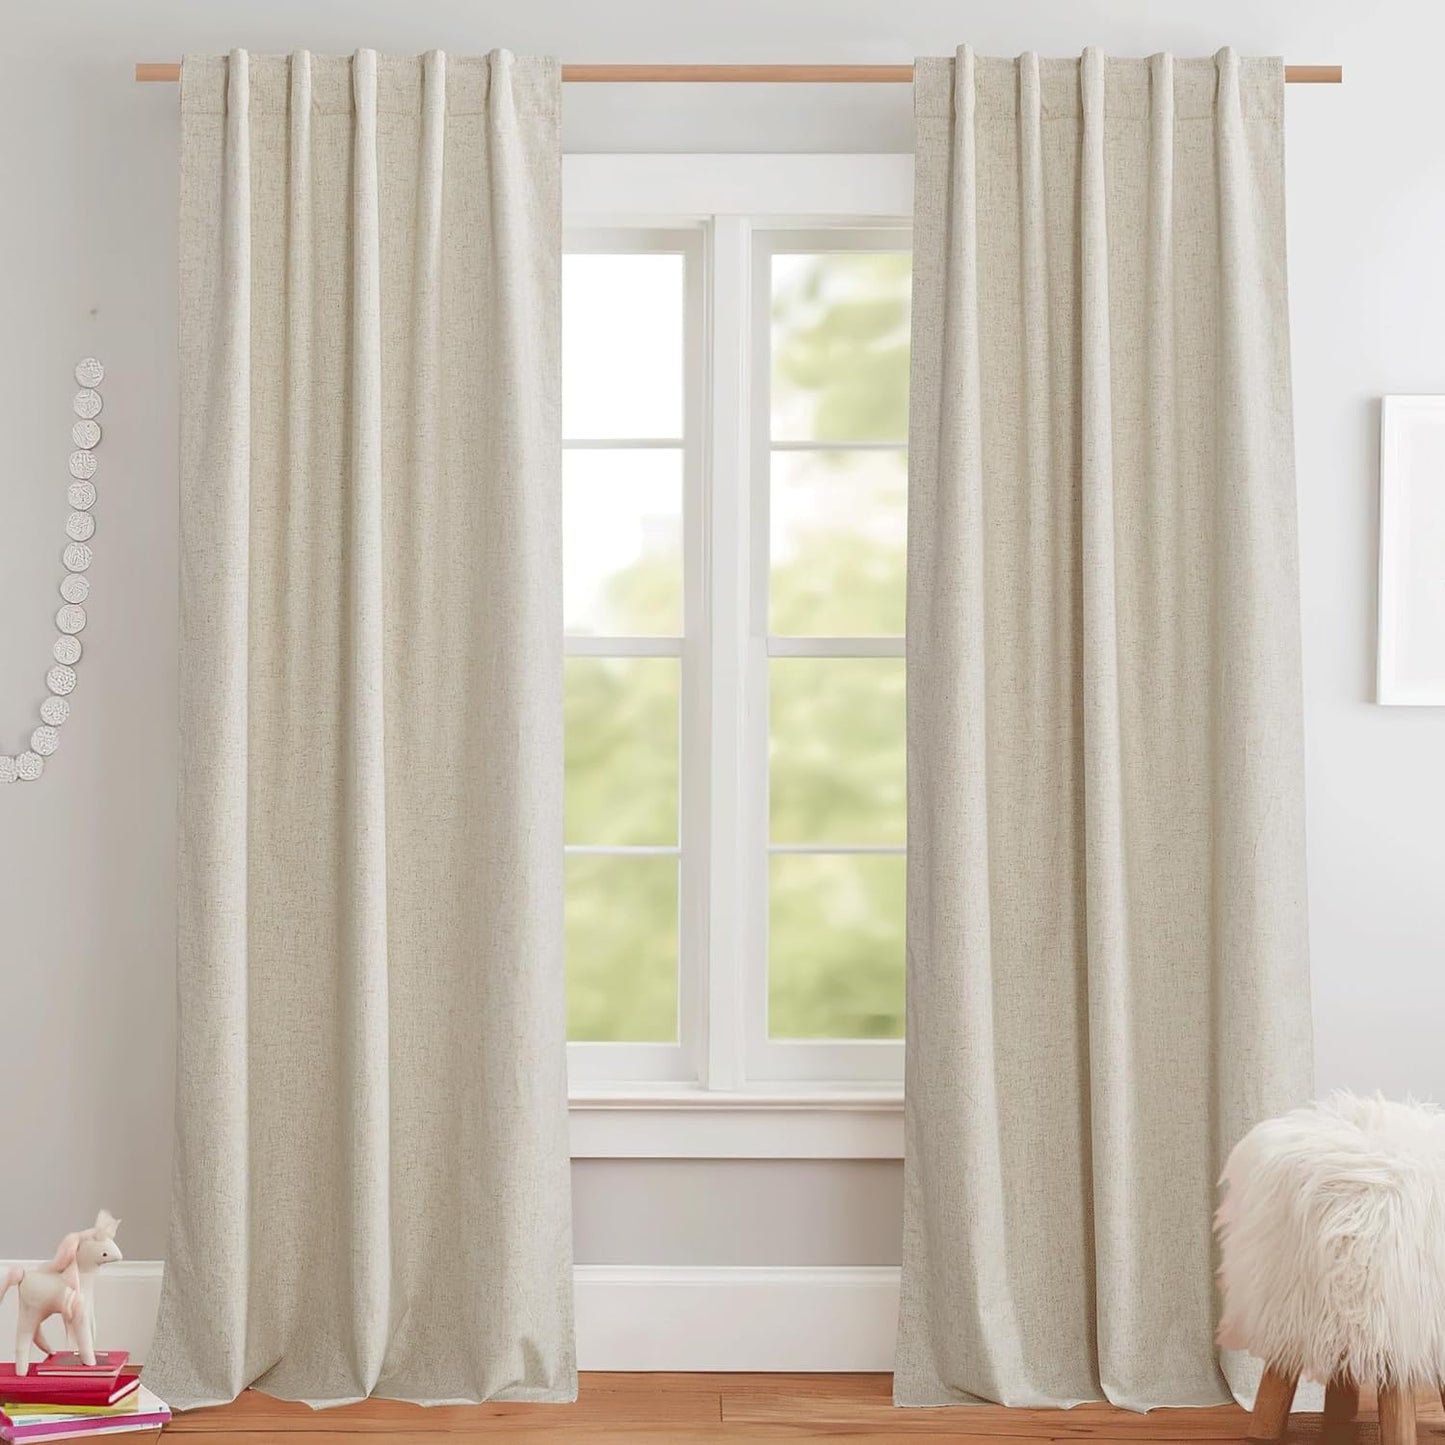 NICETOWN 100% Blackout Linen Curtains for Living Room with Thermal Insulated White Liner, Ivory, 52" Wide, 2 Panels, 84" Long Drapes, Back Tab Retro Linen Curtains Vertical Drapes Privacy for Bedroom  NICETOWN Natural W42 X L84 